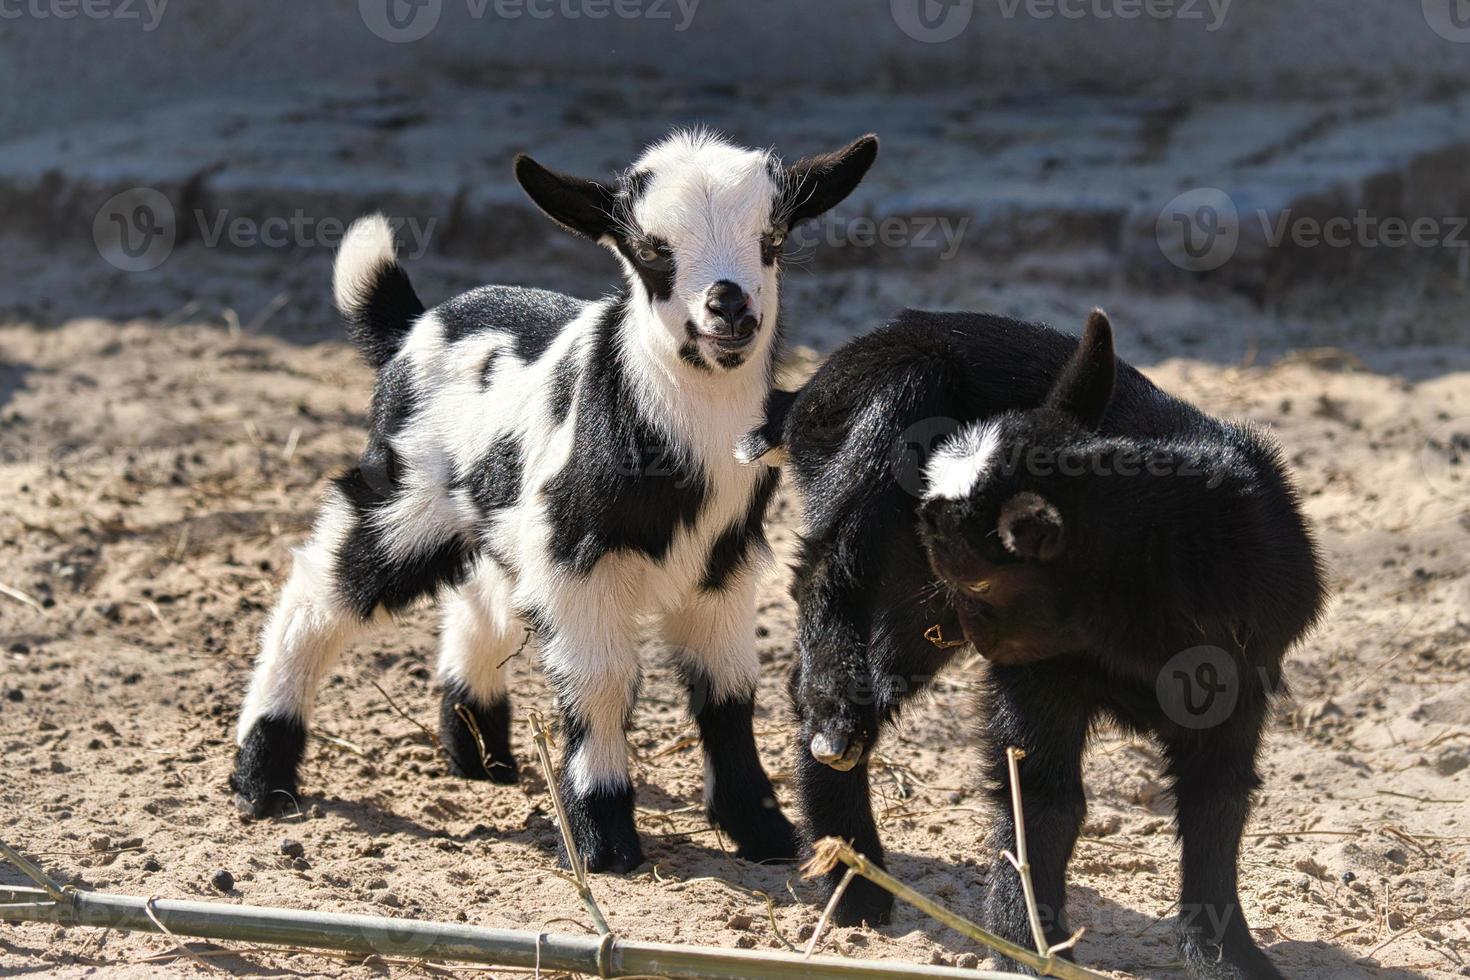 Goats are farm animals. They are interesting to watch, especially if they are young animals photo